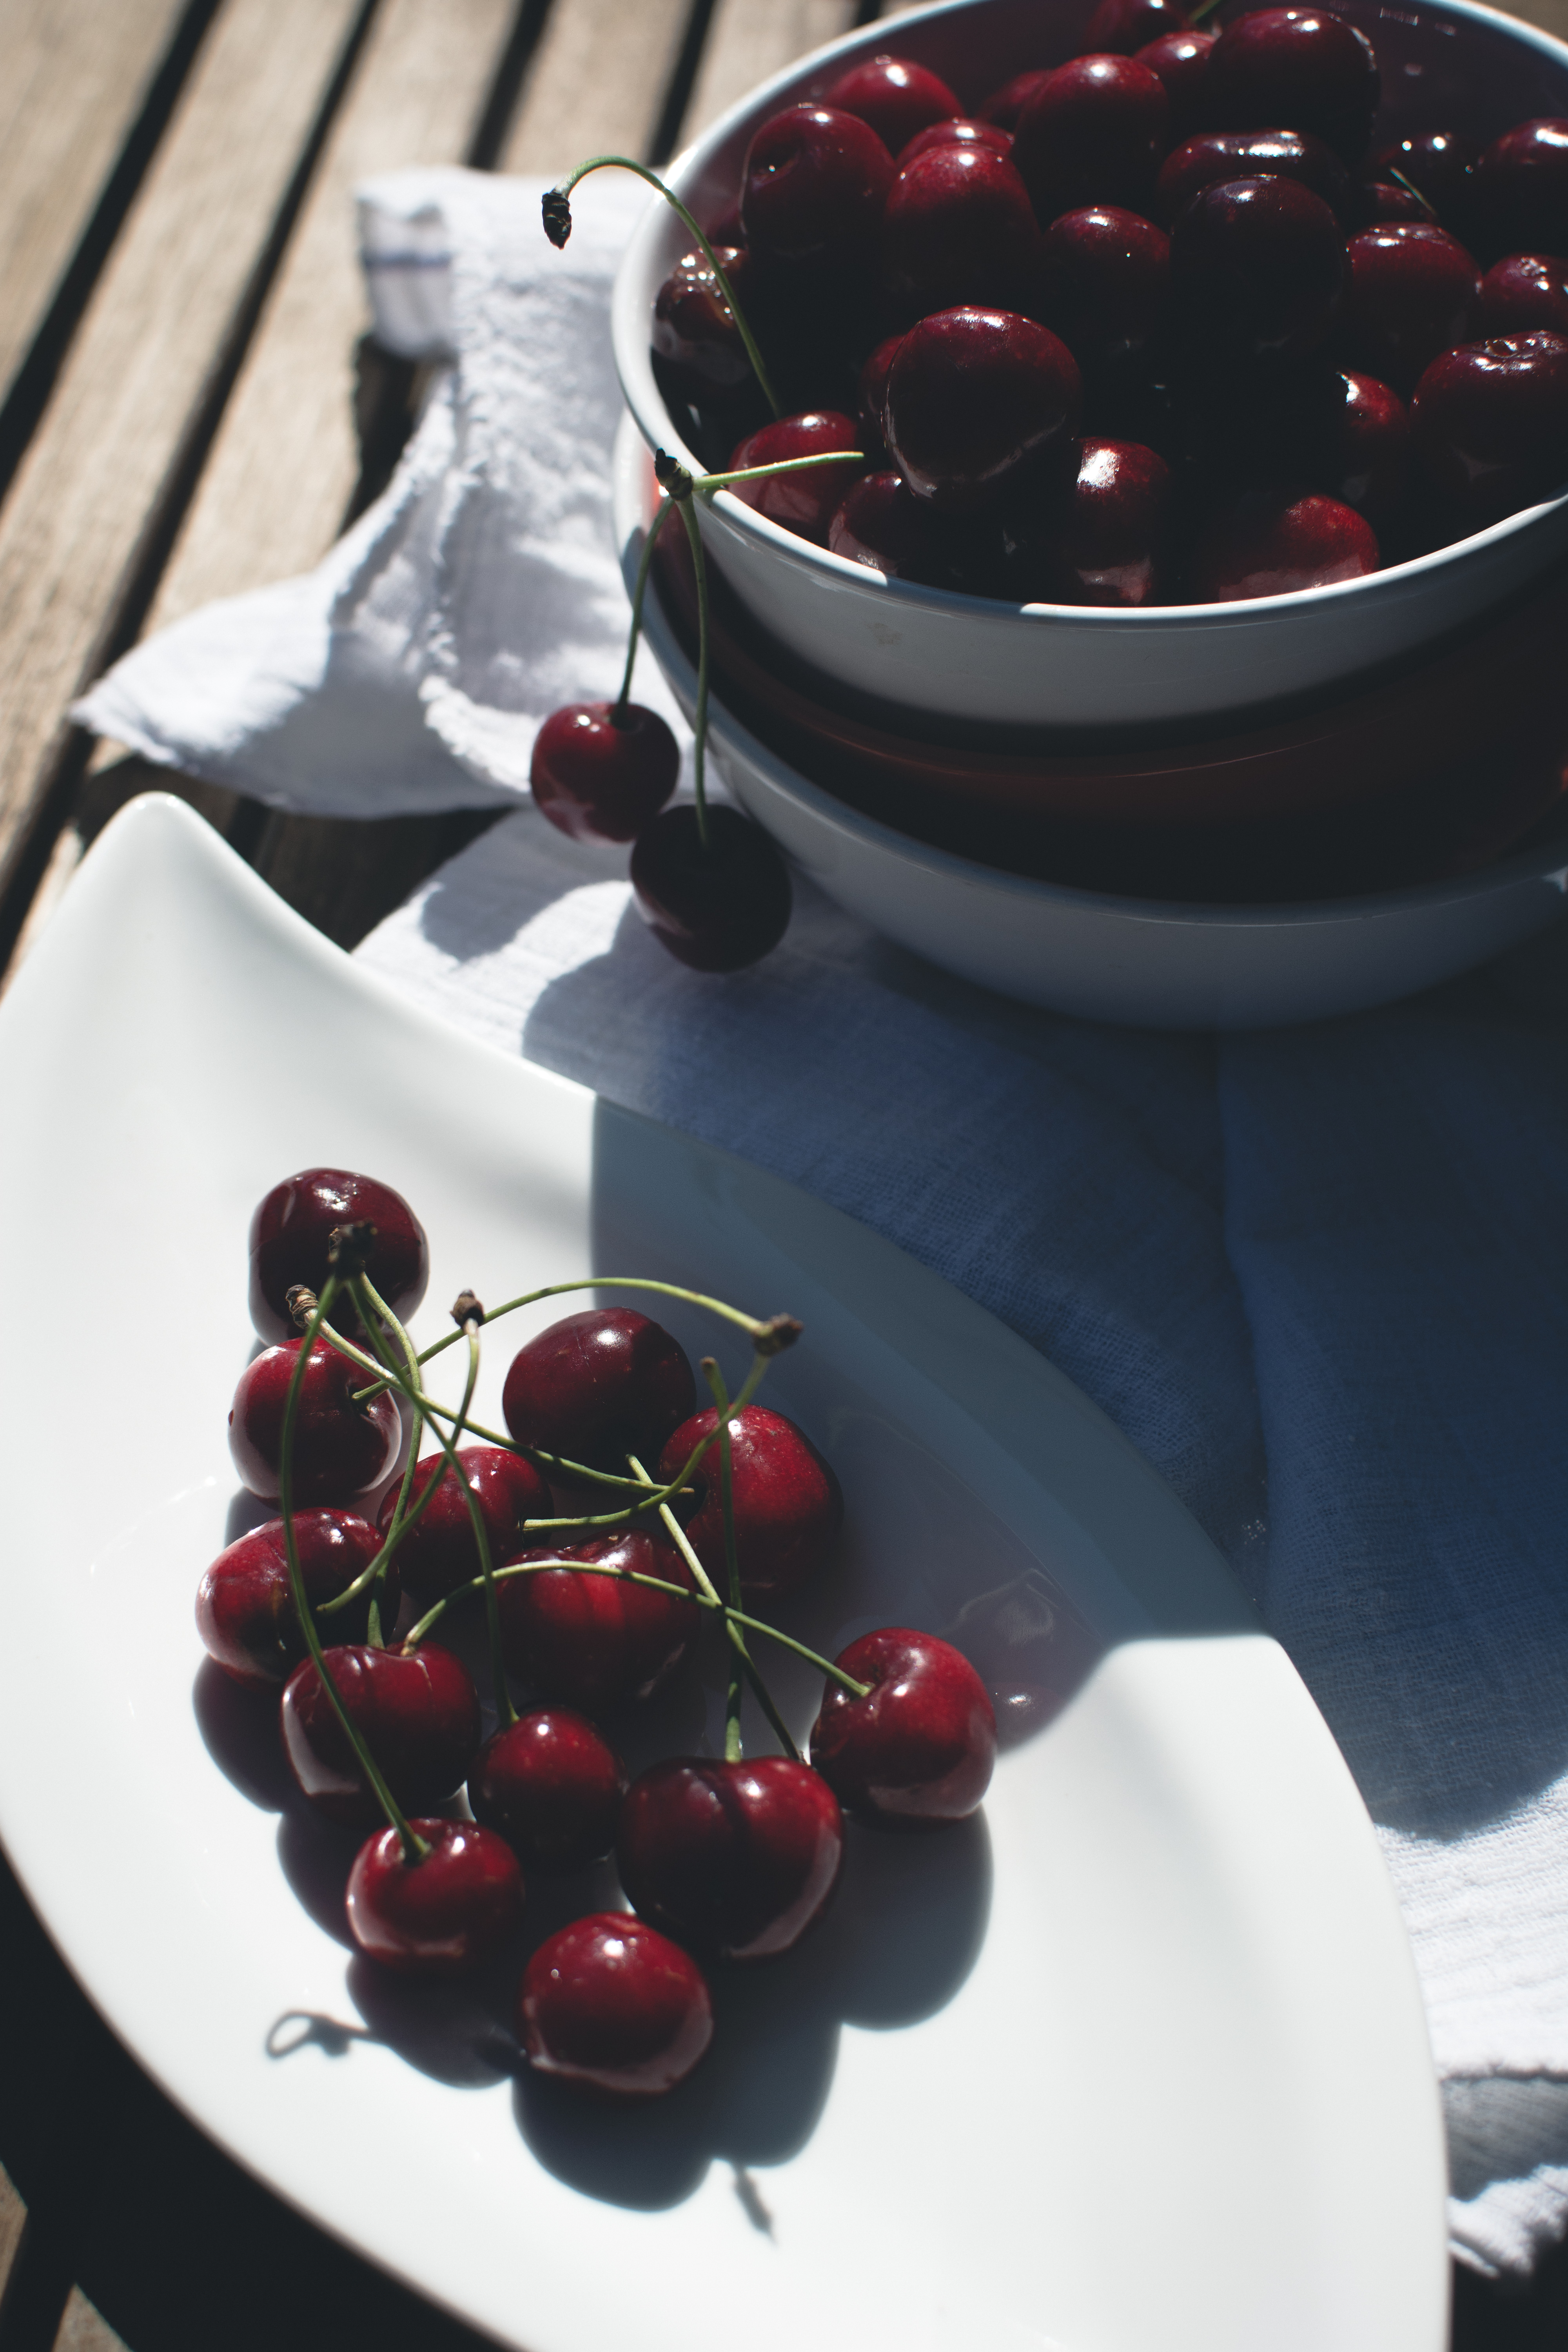 102574 download wallpaper sweet cherry, food, cherry, summer, berries, plate screensavers and pictures for free